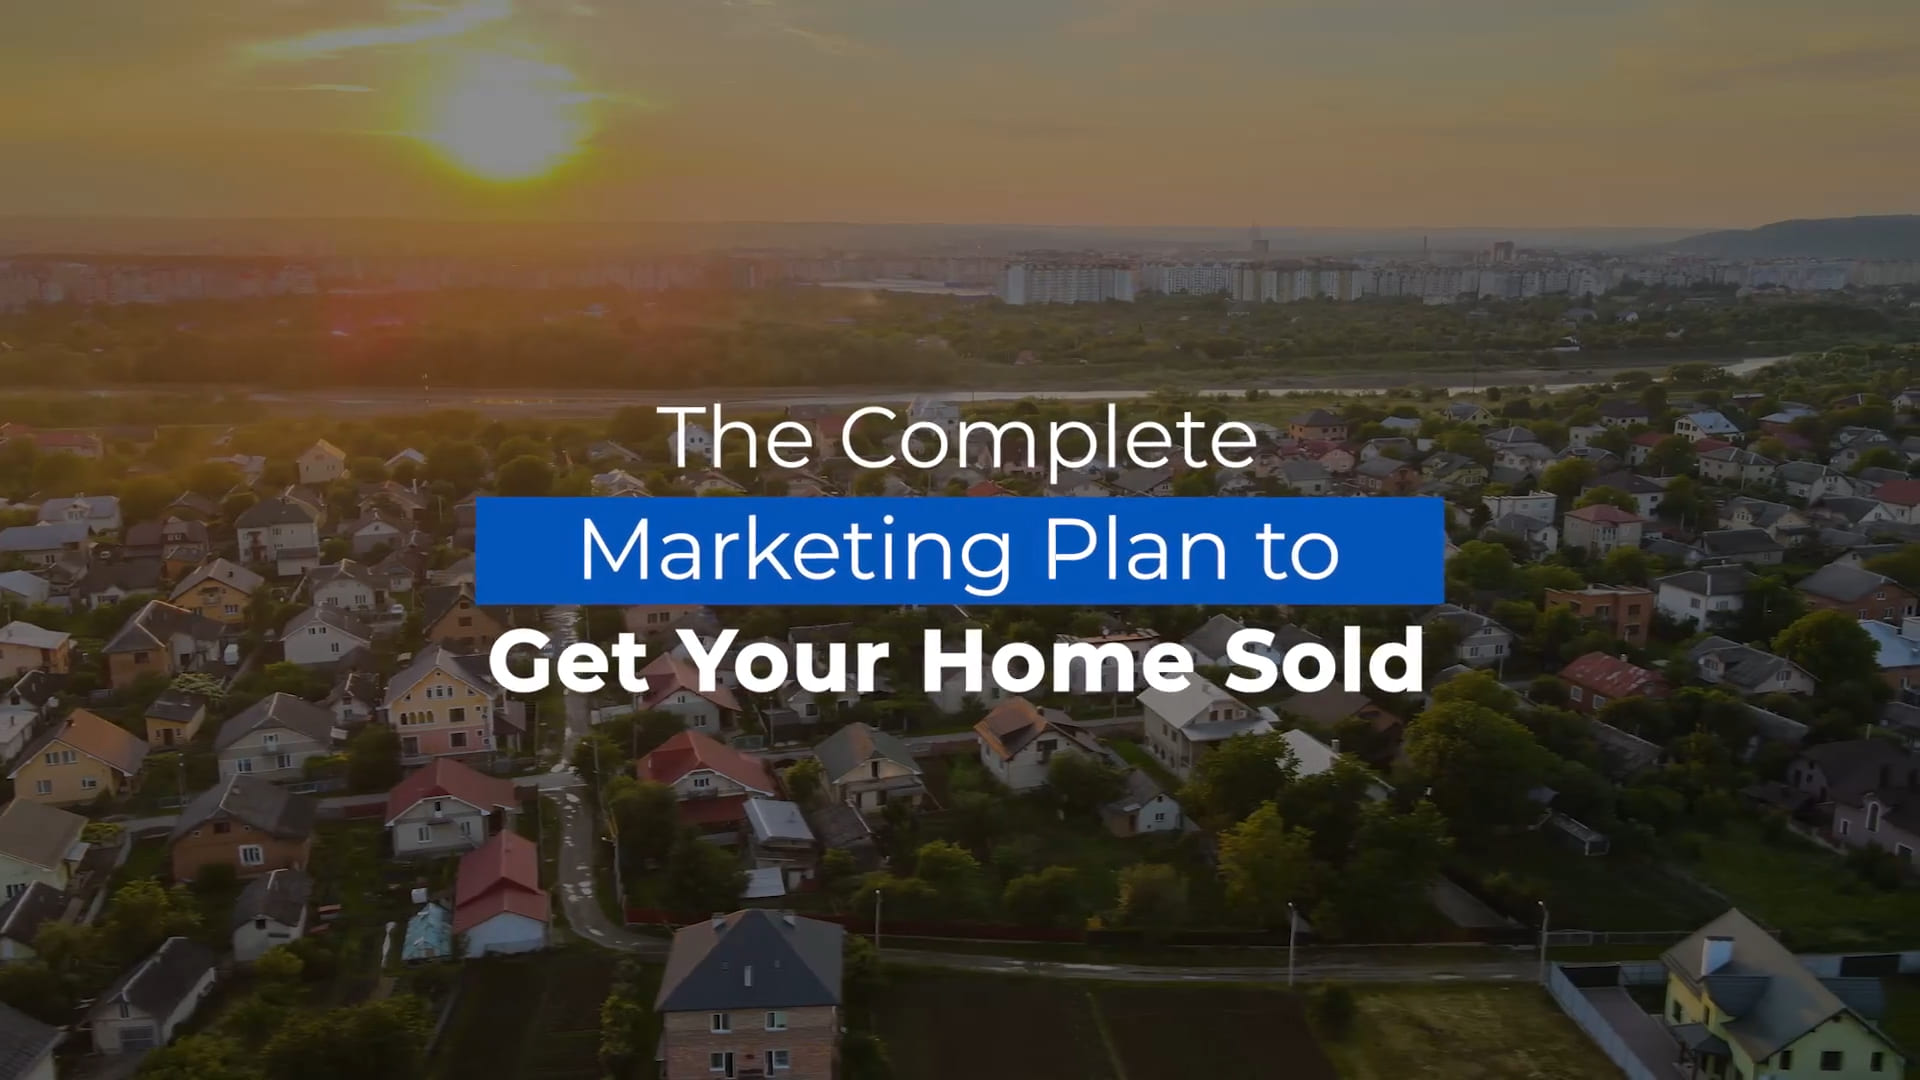 The complete marketing plan to get your home SOLD!